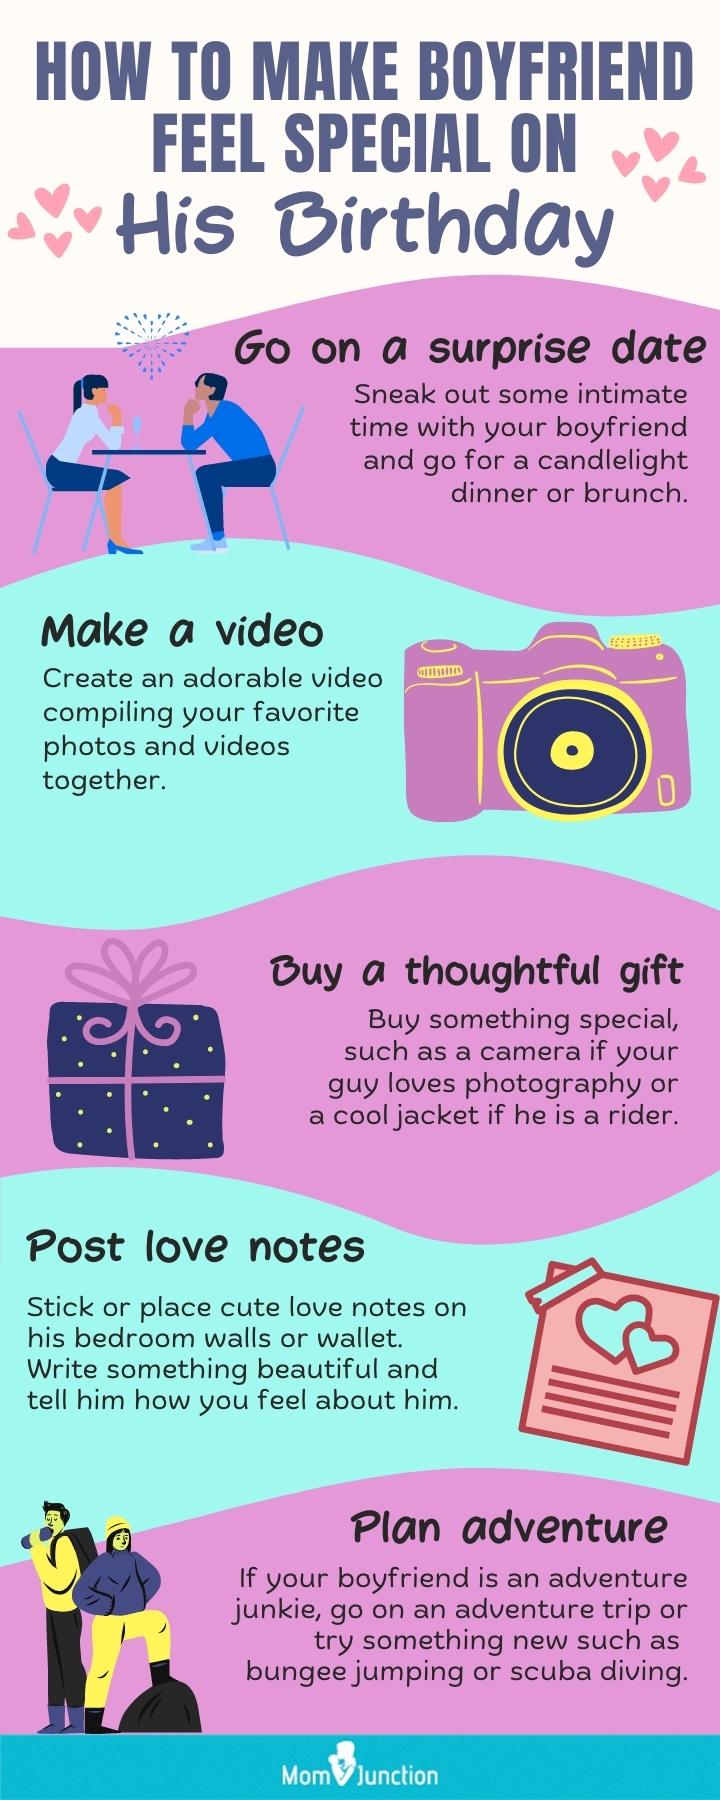 how to make boyfriend feel special on his birthday (infographic)